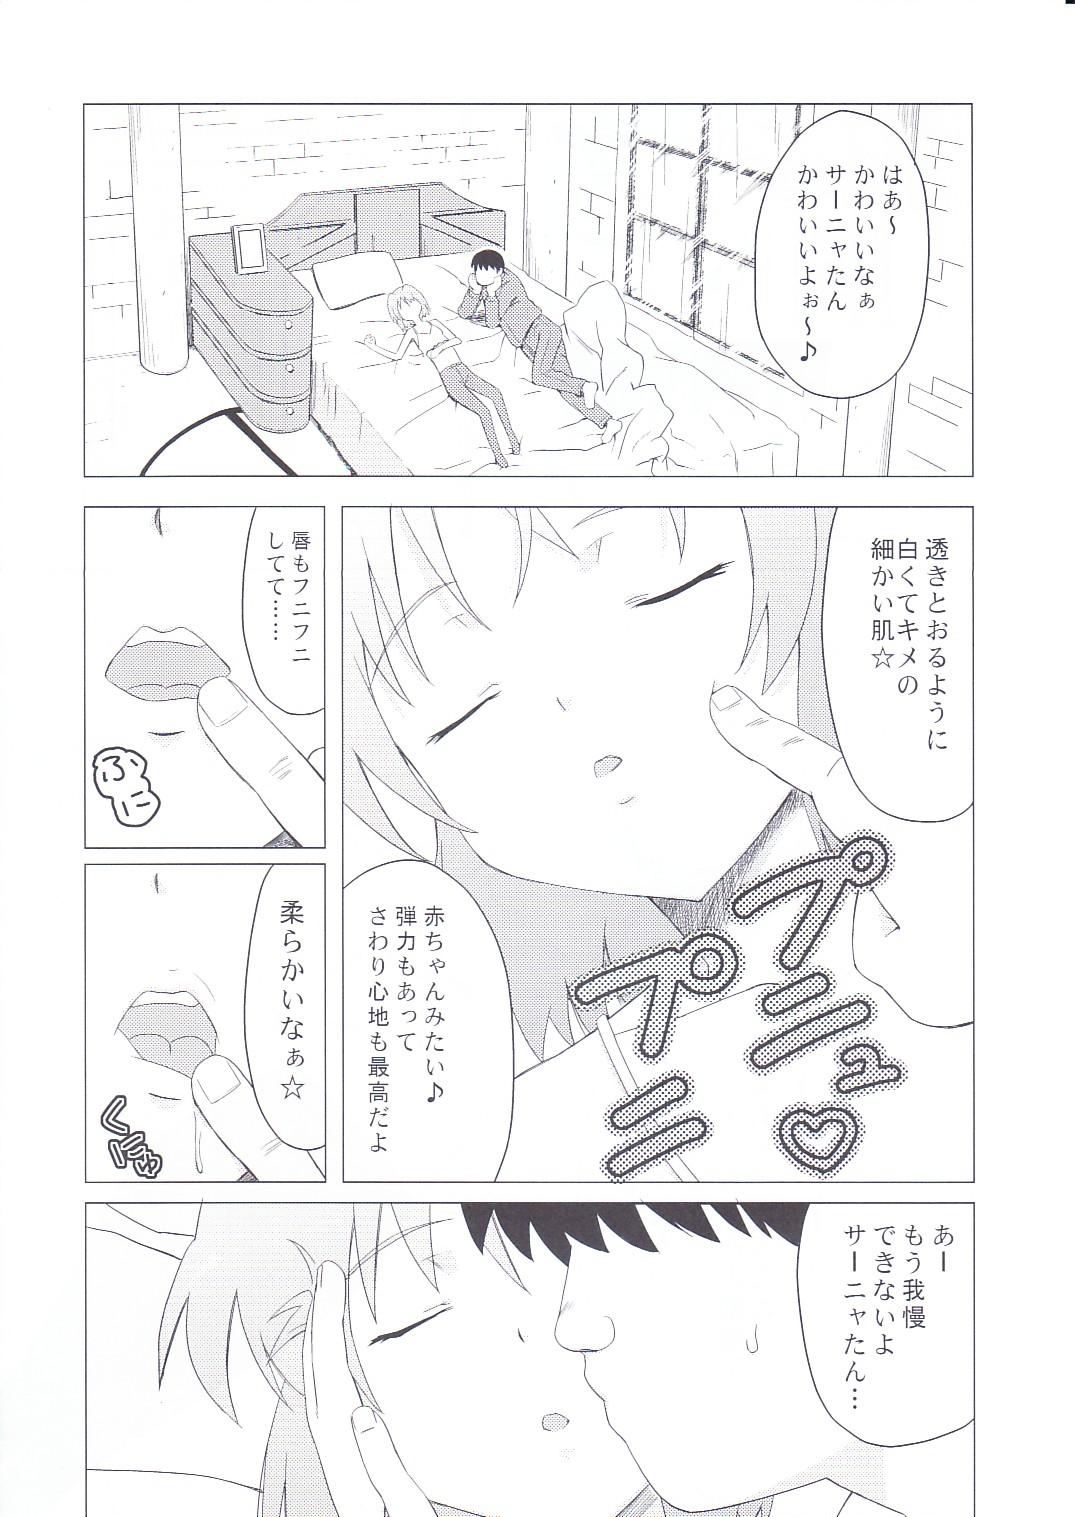 Dirty Sleeping witches - Strike witches Gostosas - Page 5